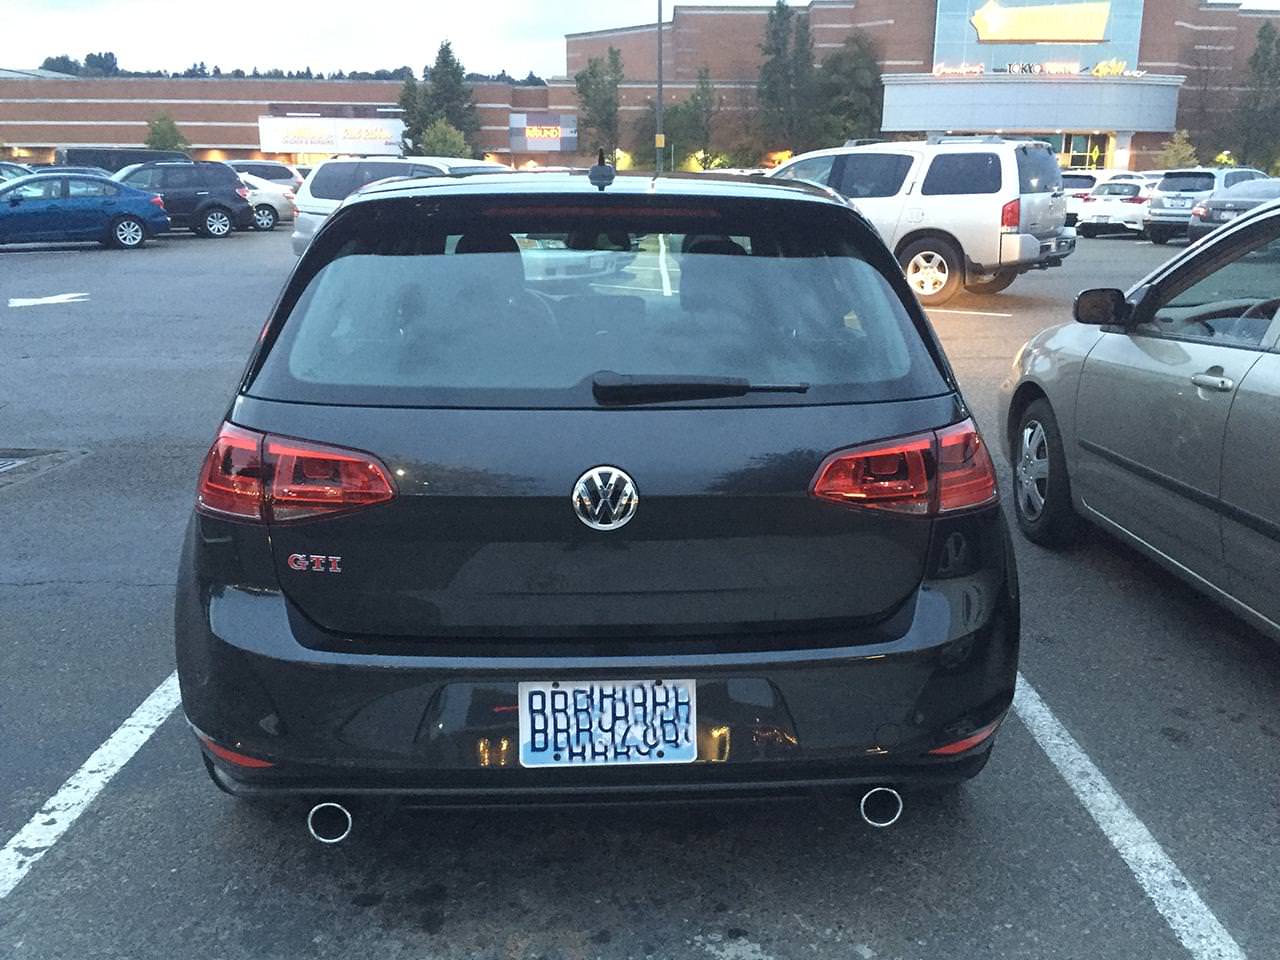 Finally joined the Golf gang! 2017 MK7 GTI Sport in Carbon Steel